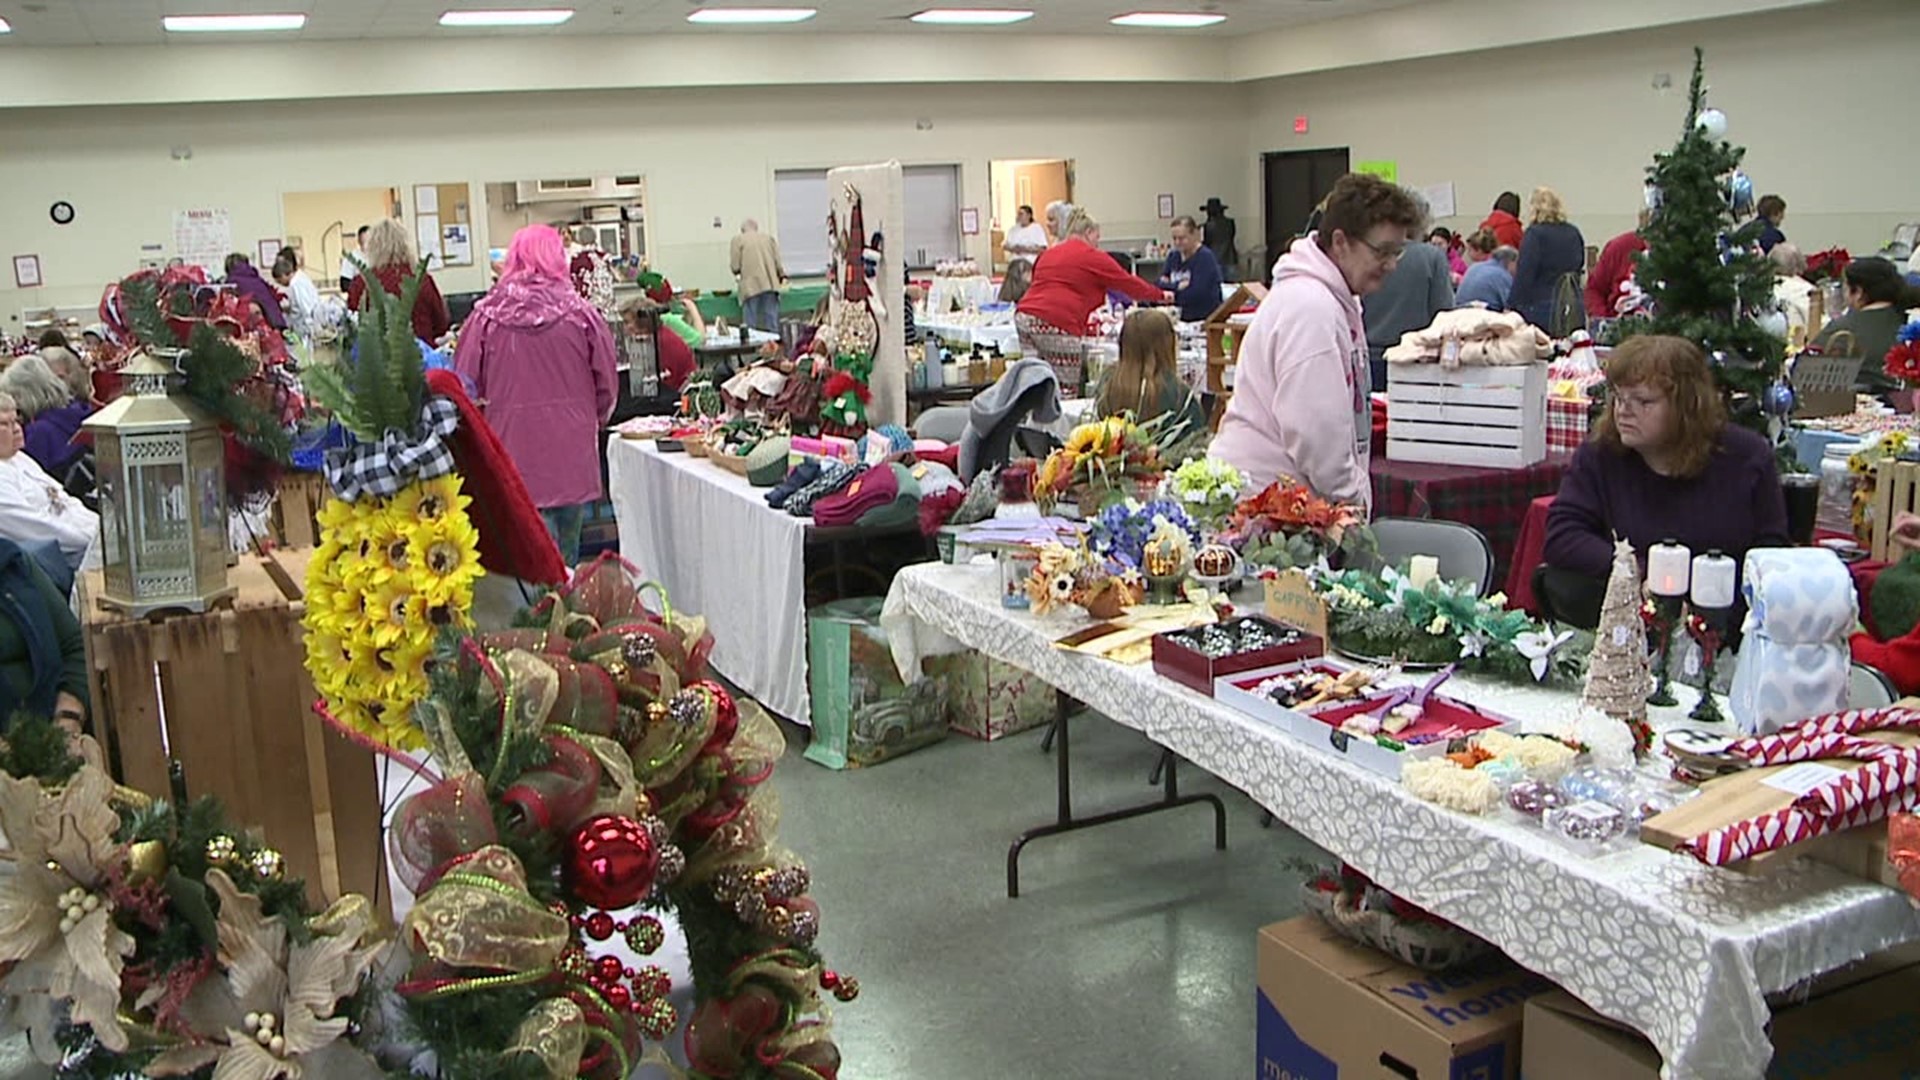 The craft fair was held at the Faith United Church of Christ in Hazleton Sunday afternoon.